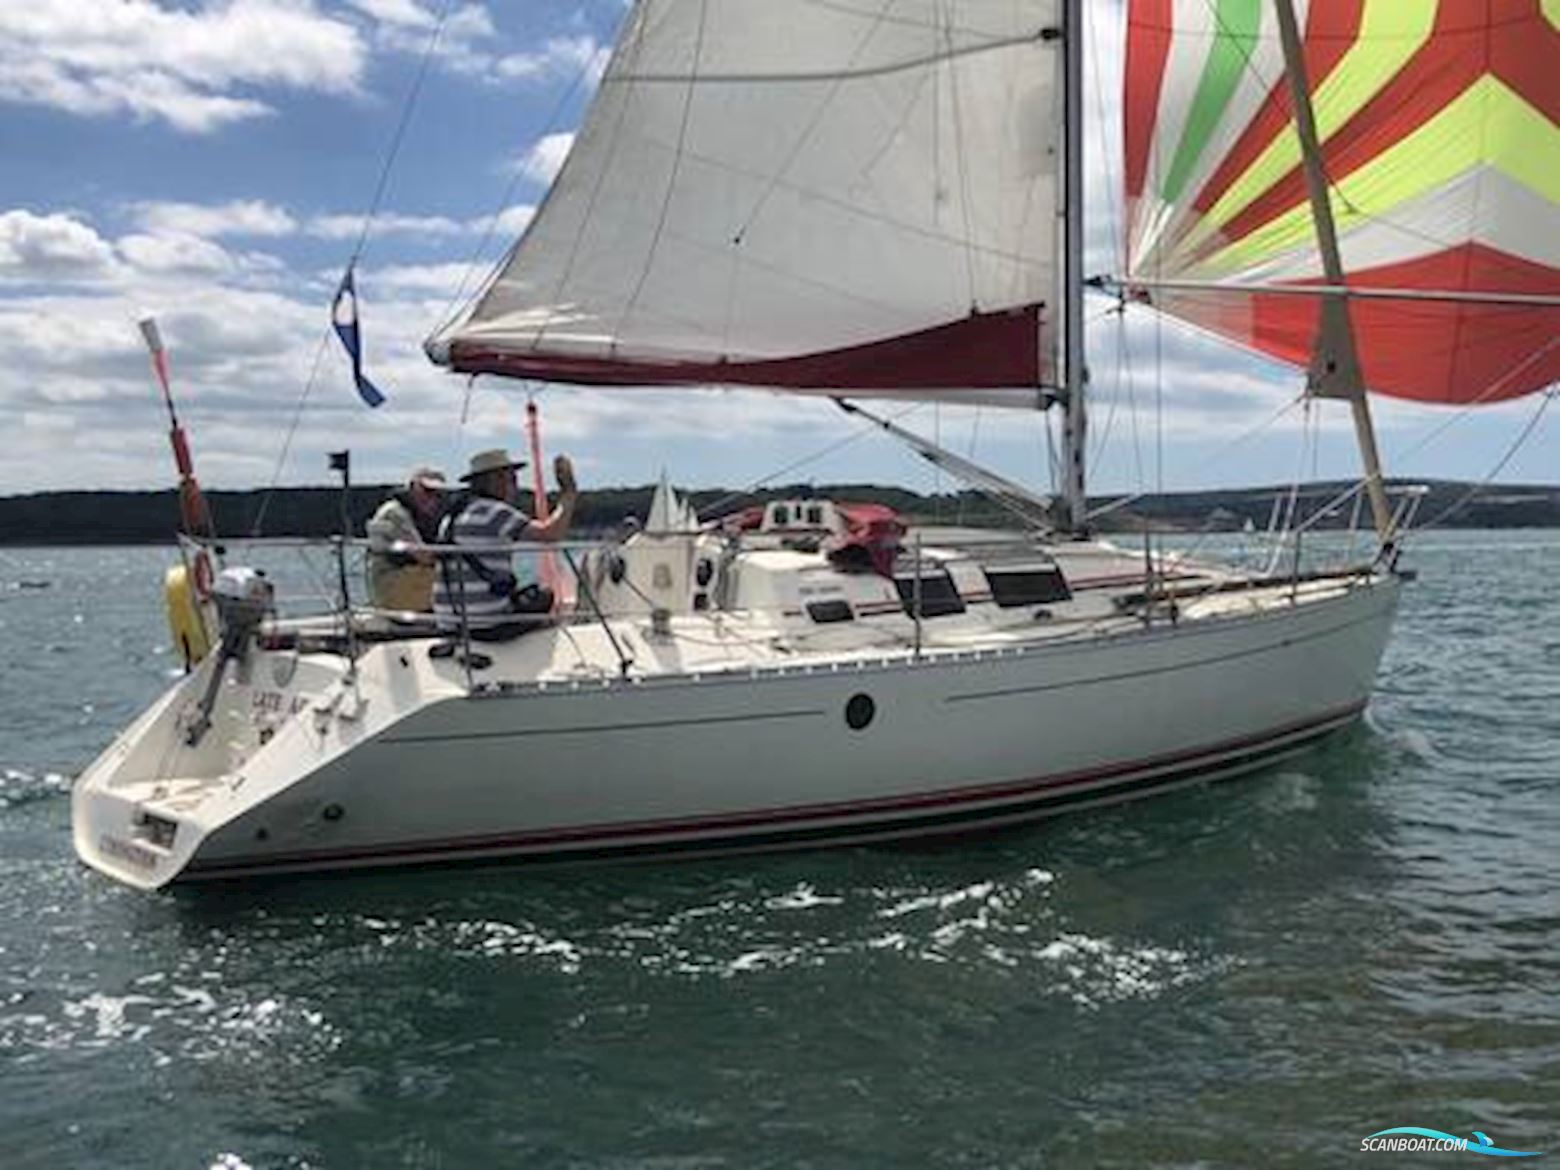 Beneteau First 32s 5 Sailing boat 1989, with Volvo 2002 engine, United Kingdom